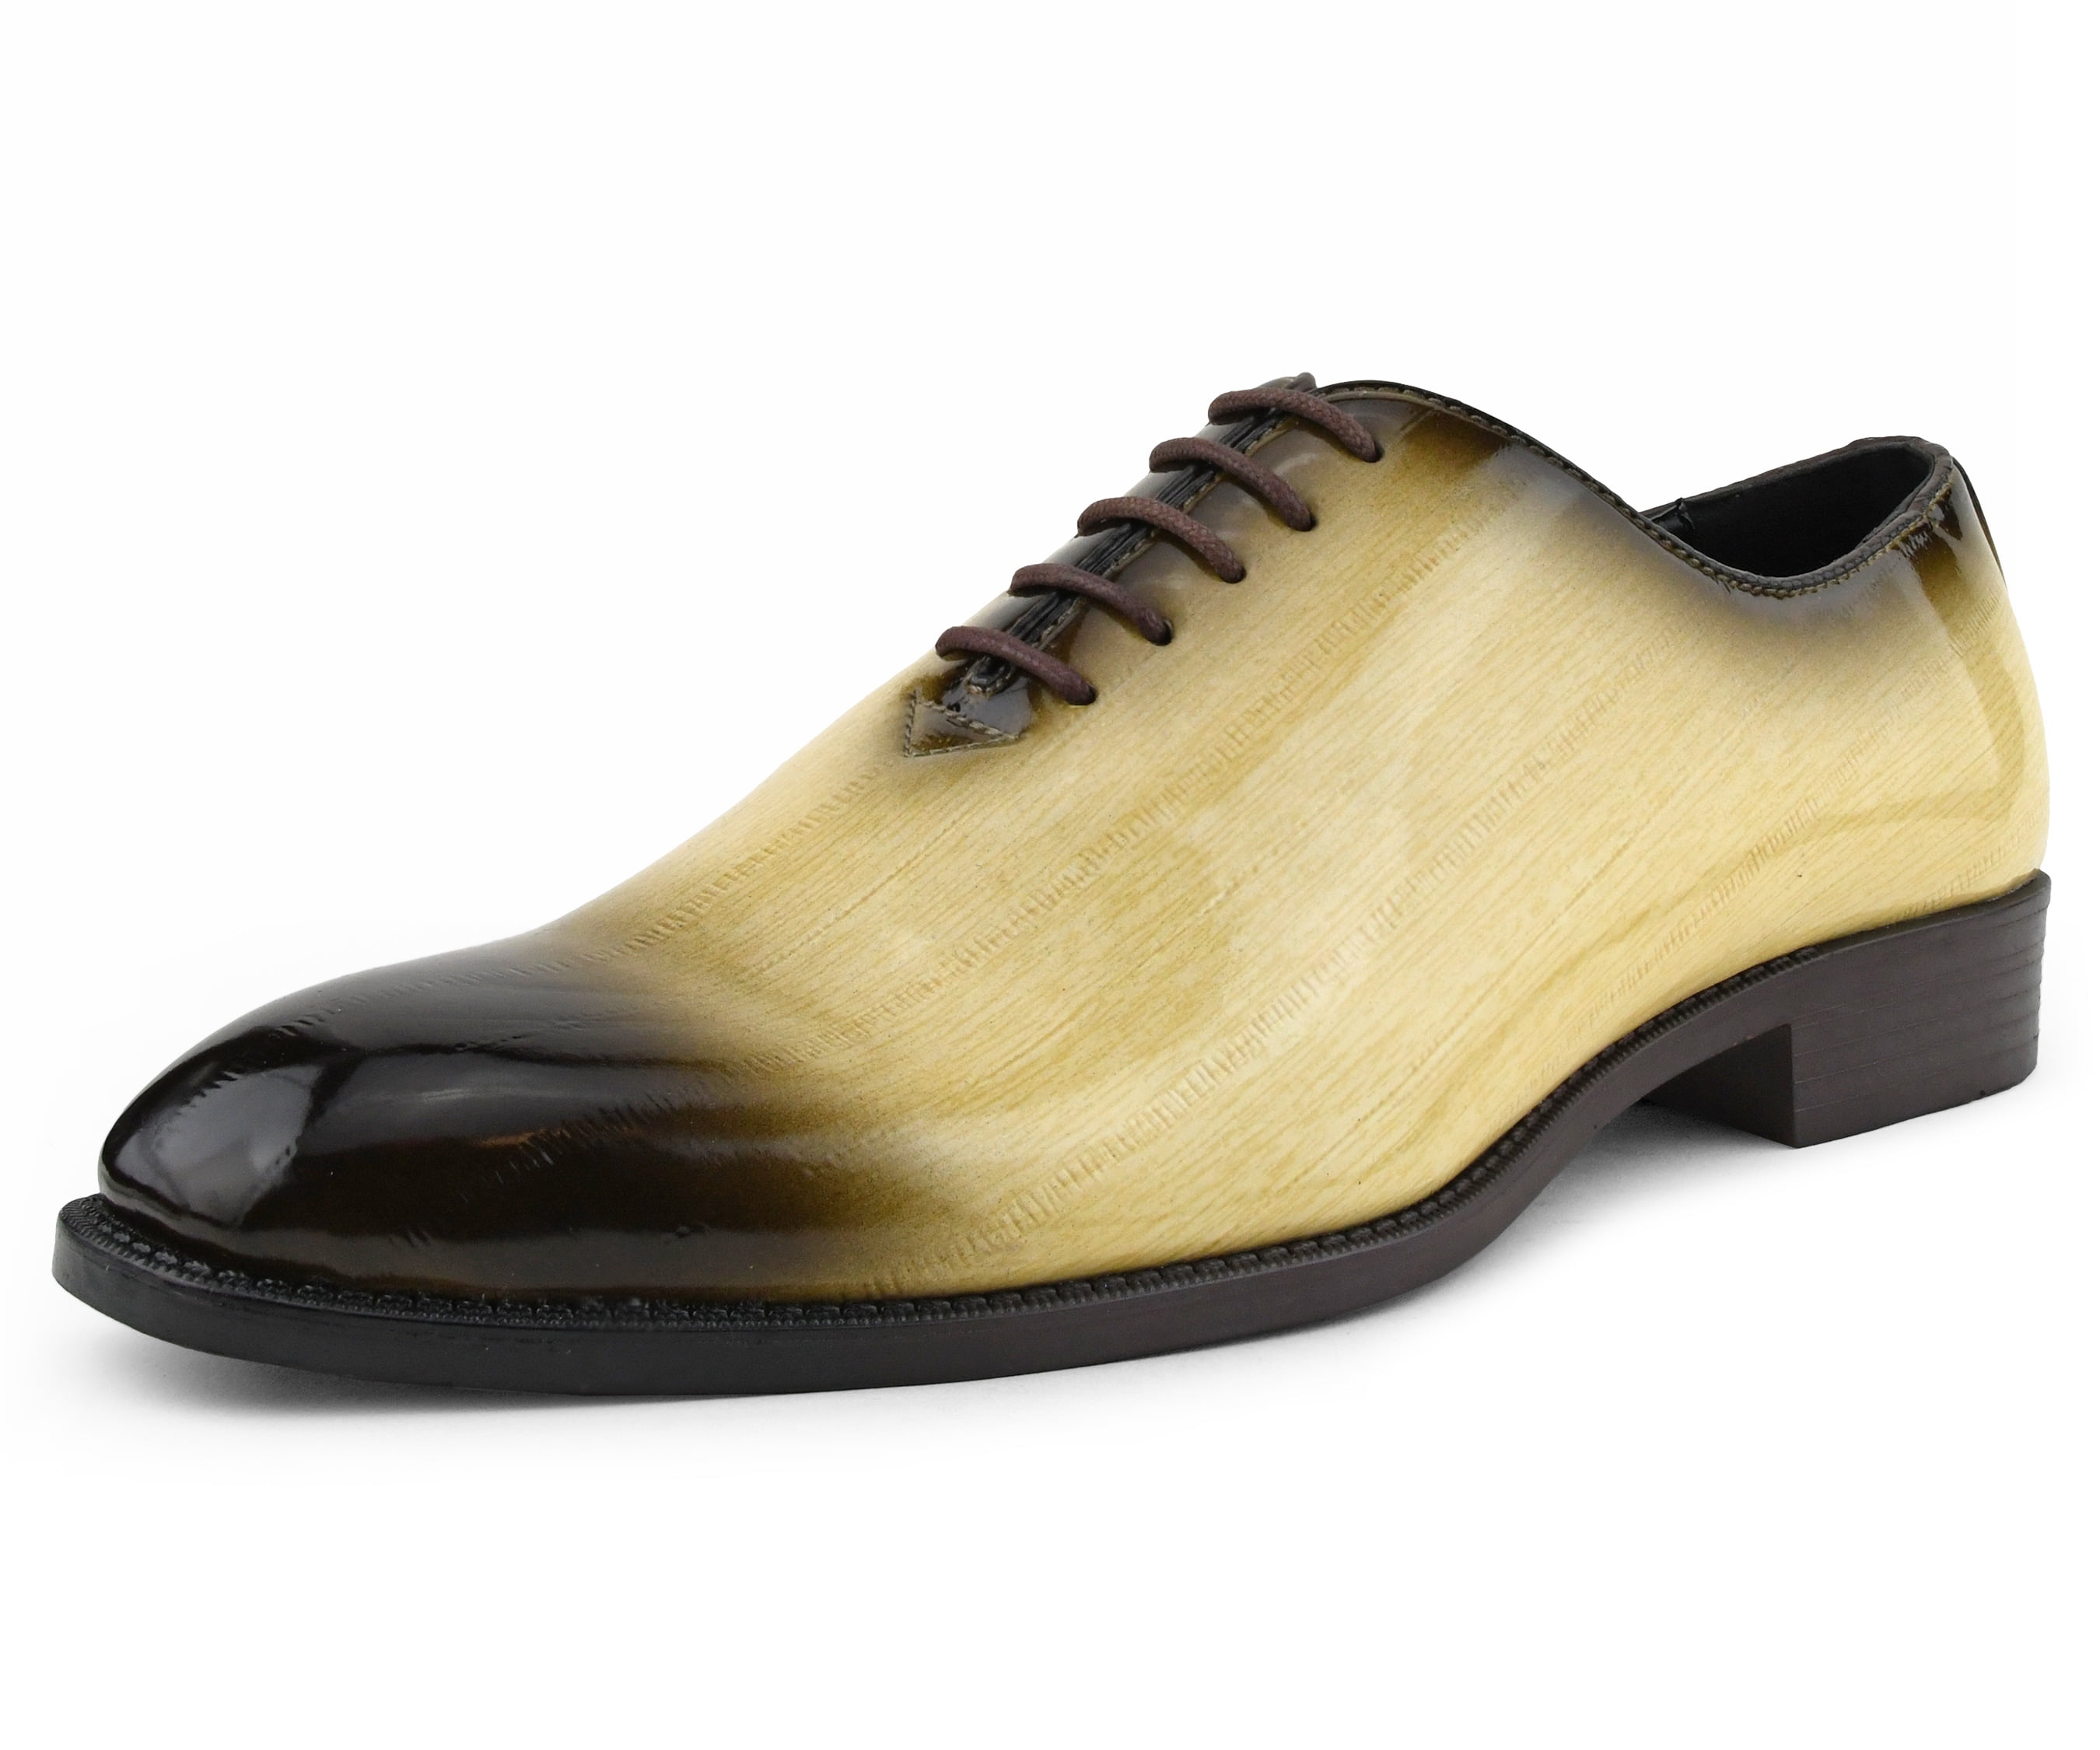 Buy > mens taupe dress shoes > in stock